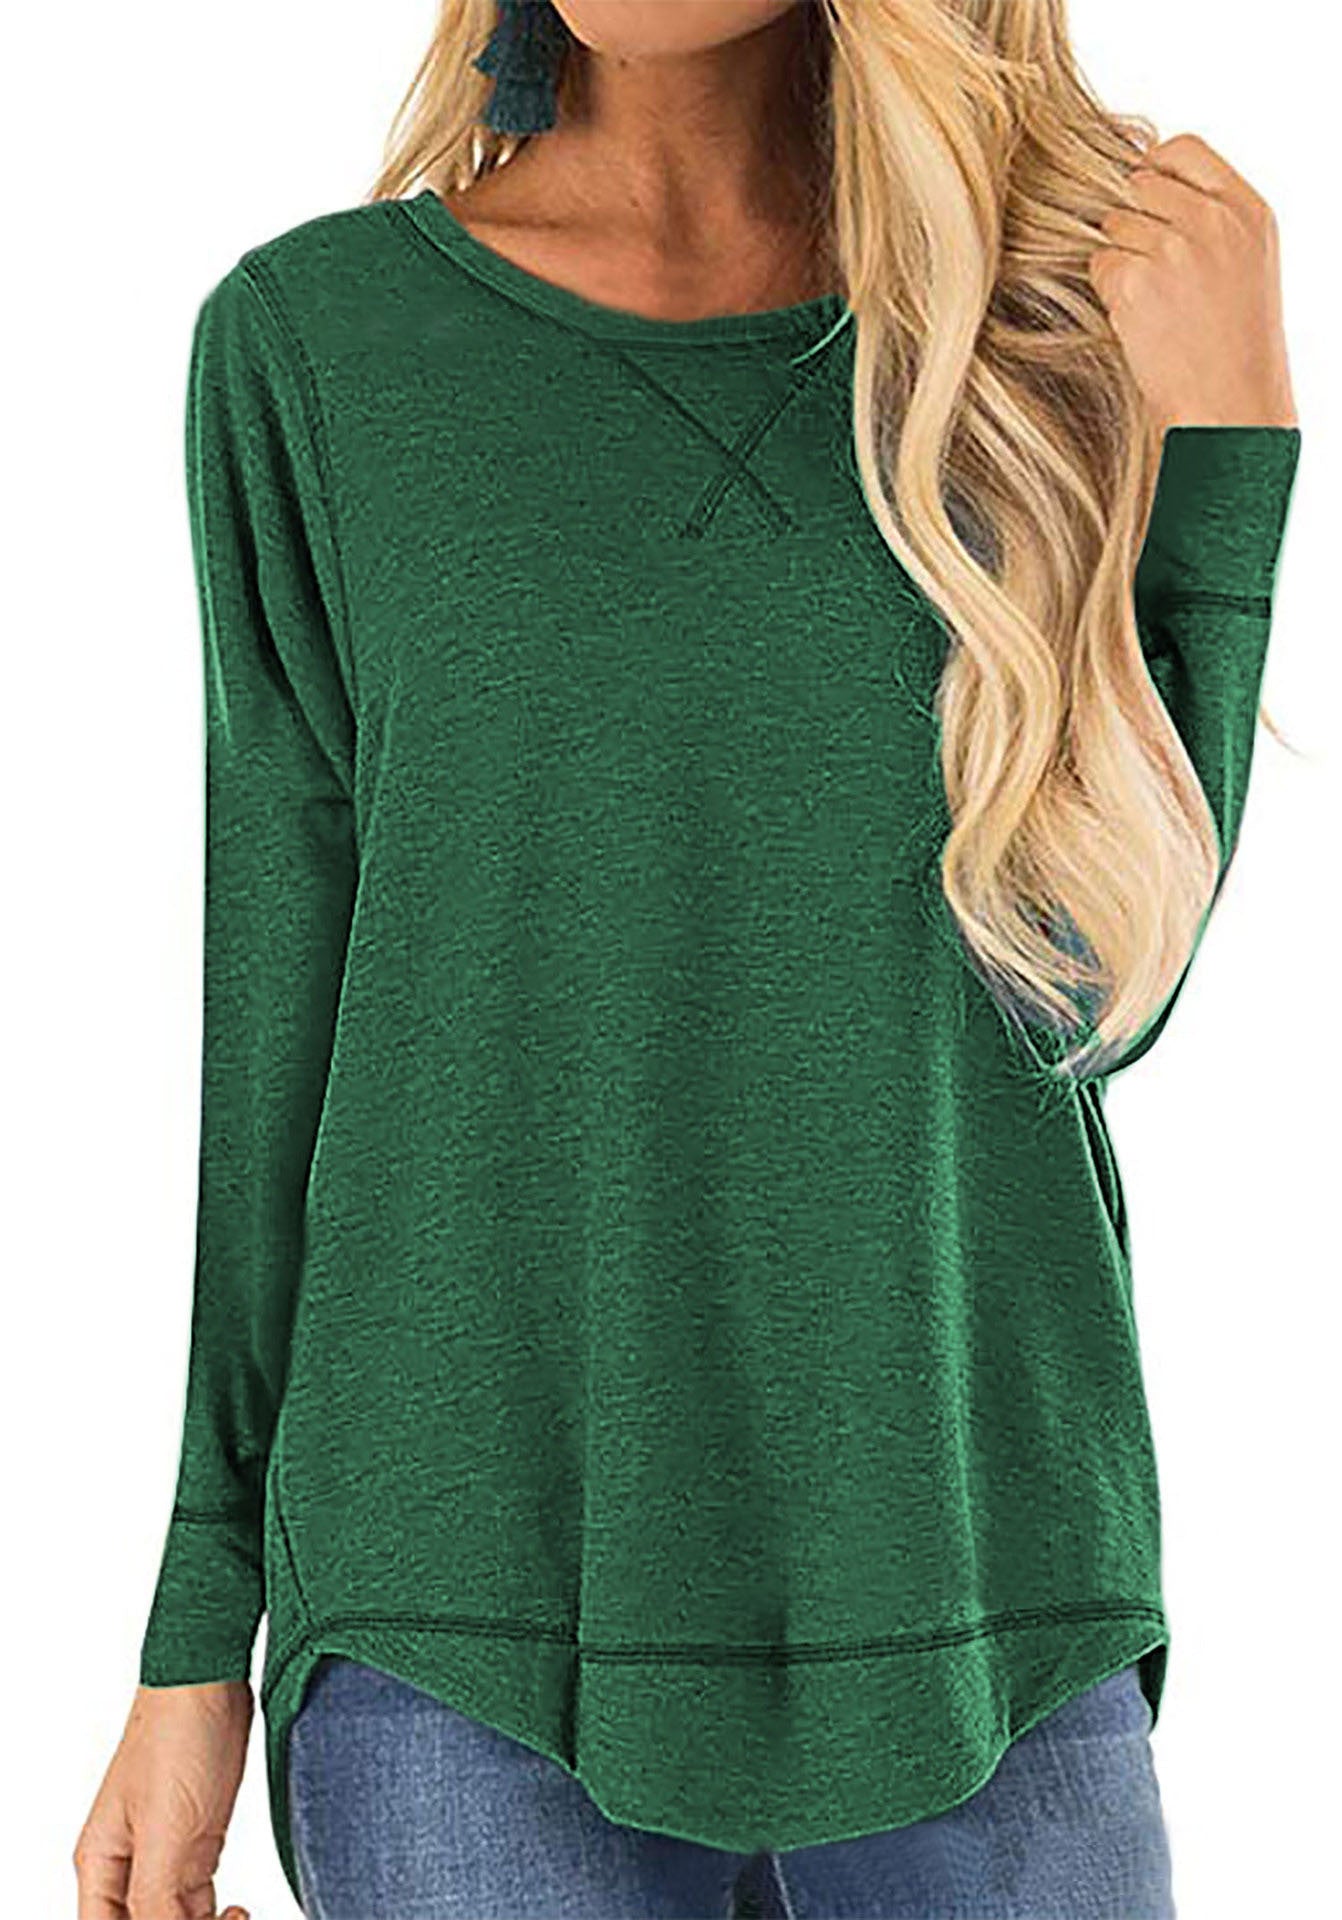 Women's Round Neck Long Sleeve T-shirt Solid Color Loose Back Blouses